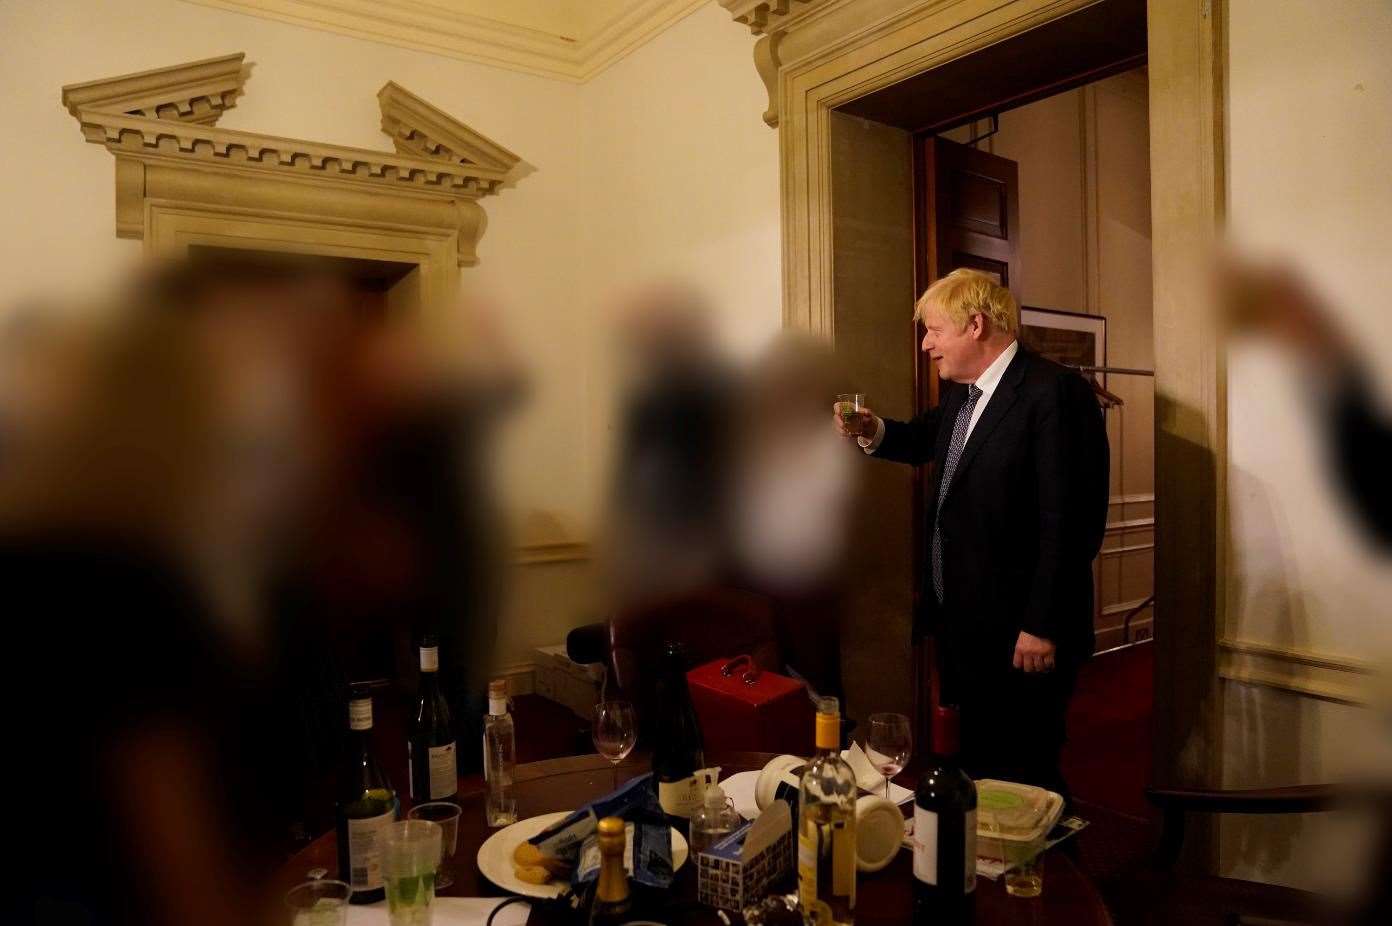 Prime Minister Boris Johnson at a gathering in 10 Downing Street (Sue Gray Report/Cabinet Office/PA)